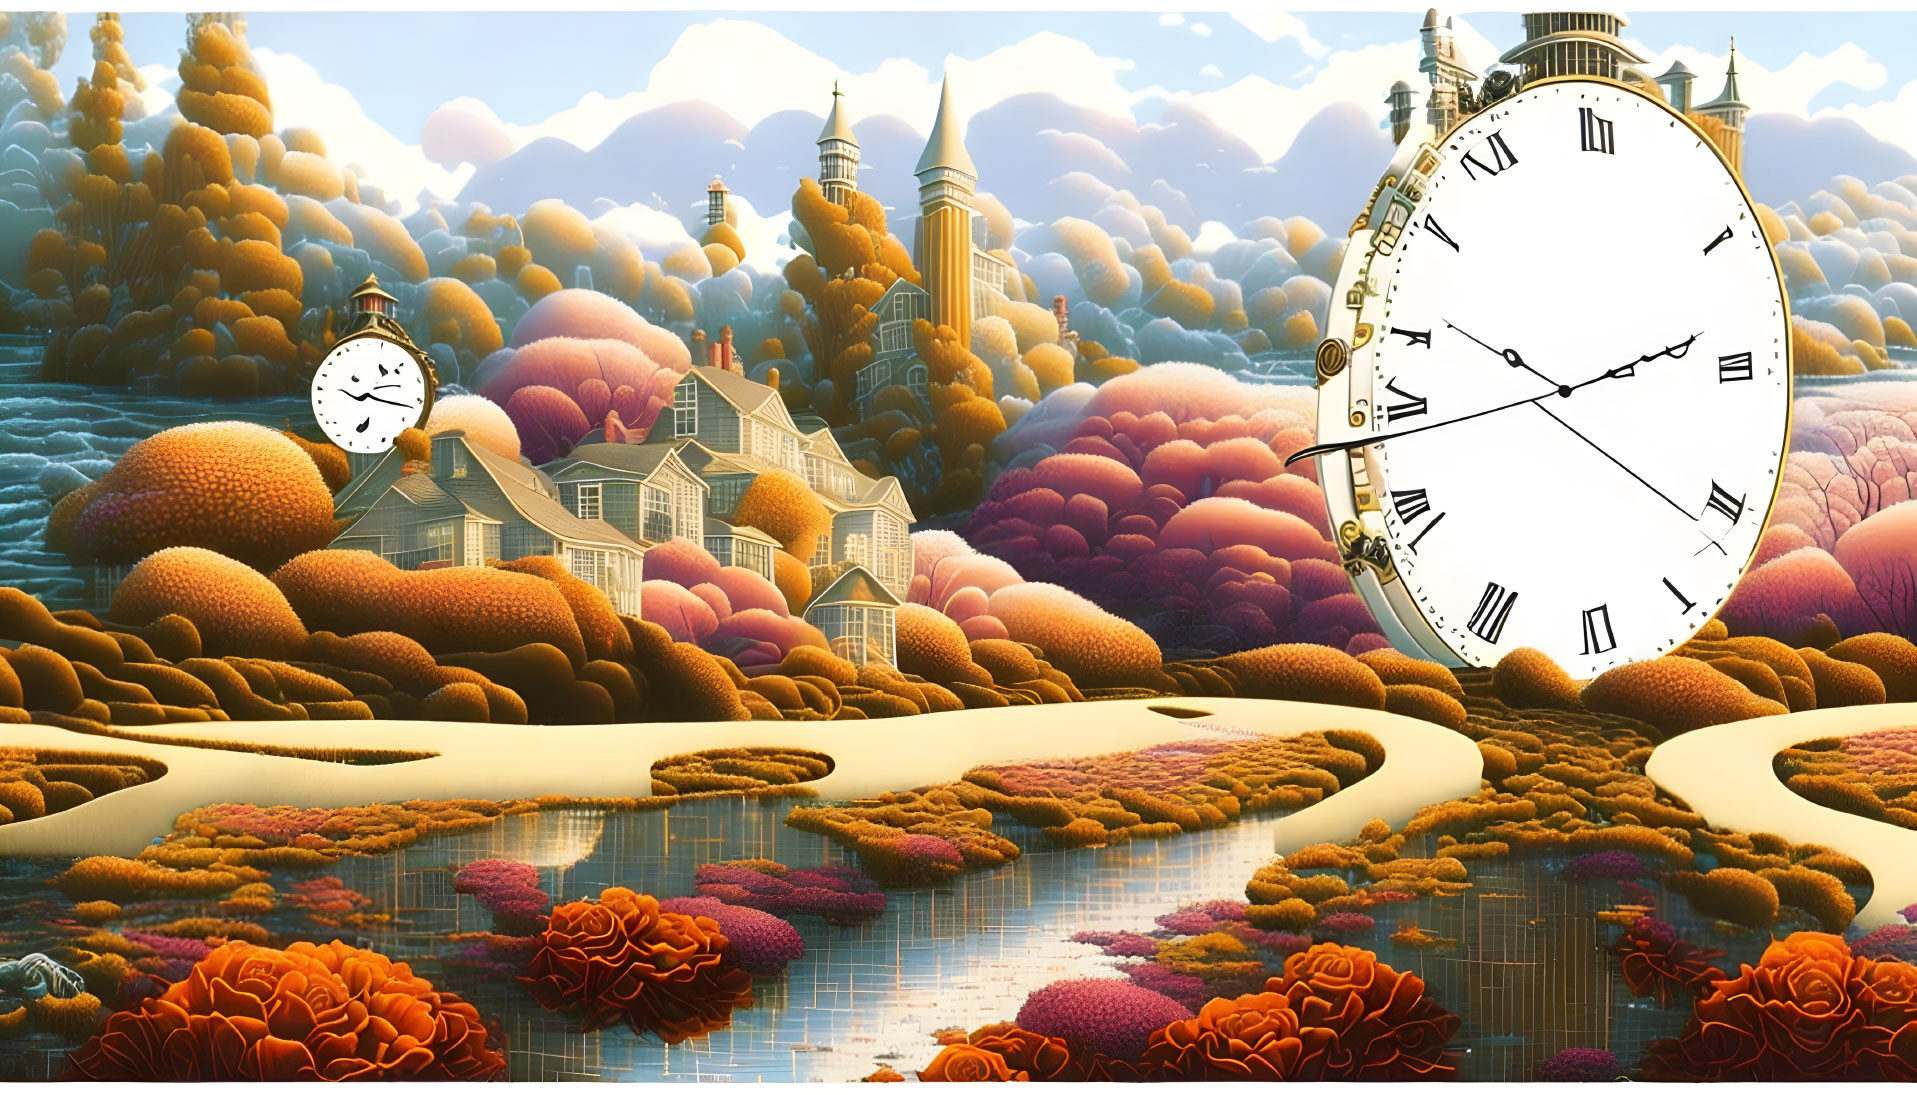 Surreal landscape with clock house, winding rivers, colorful foliage, and fantasy architecture